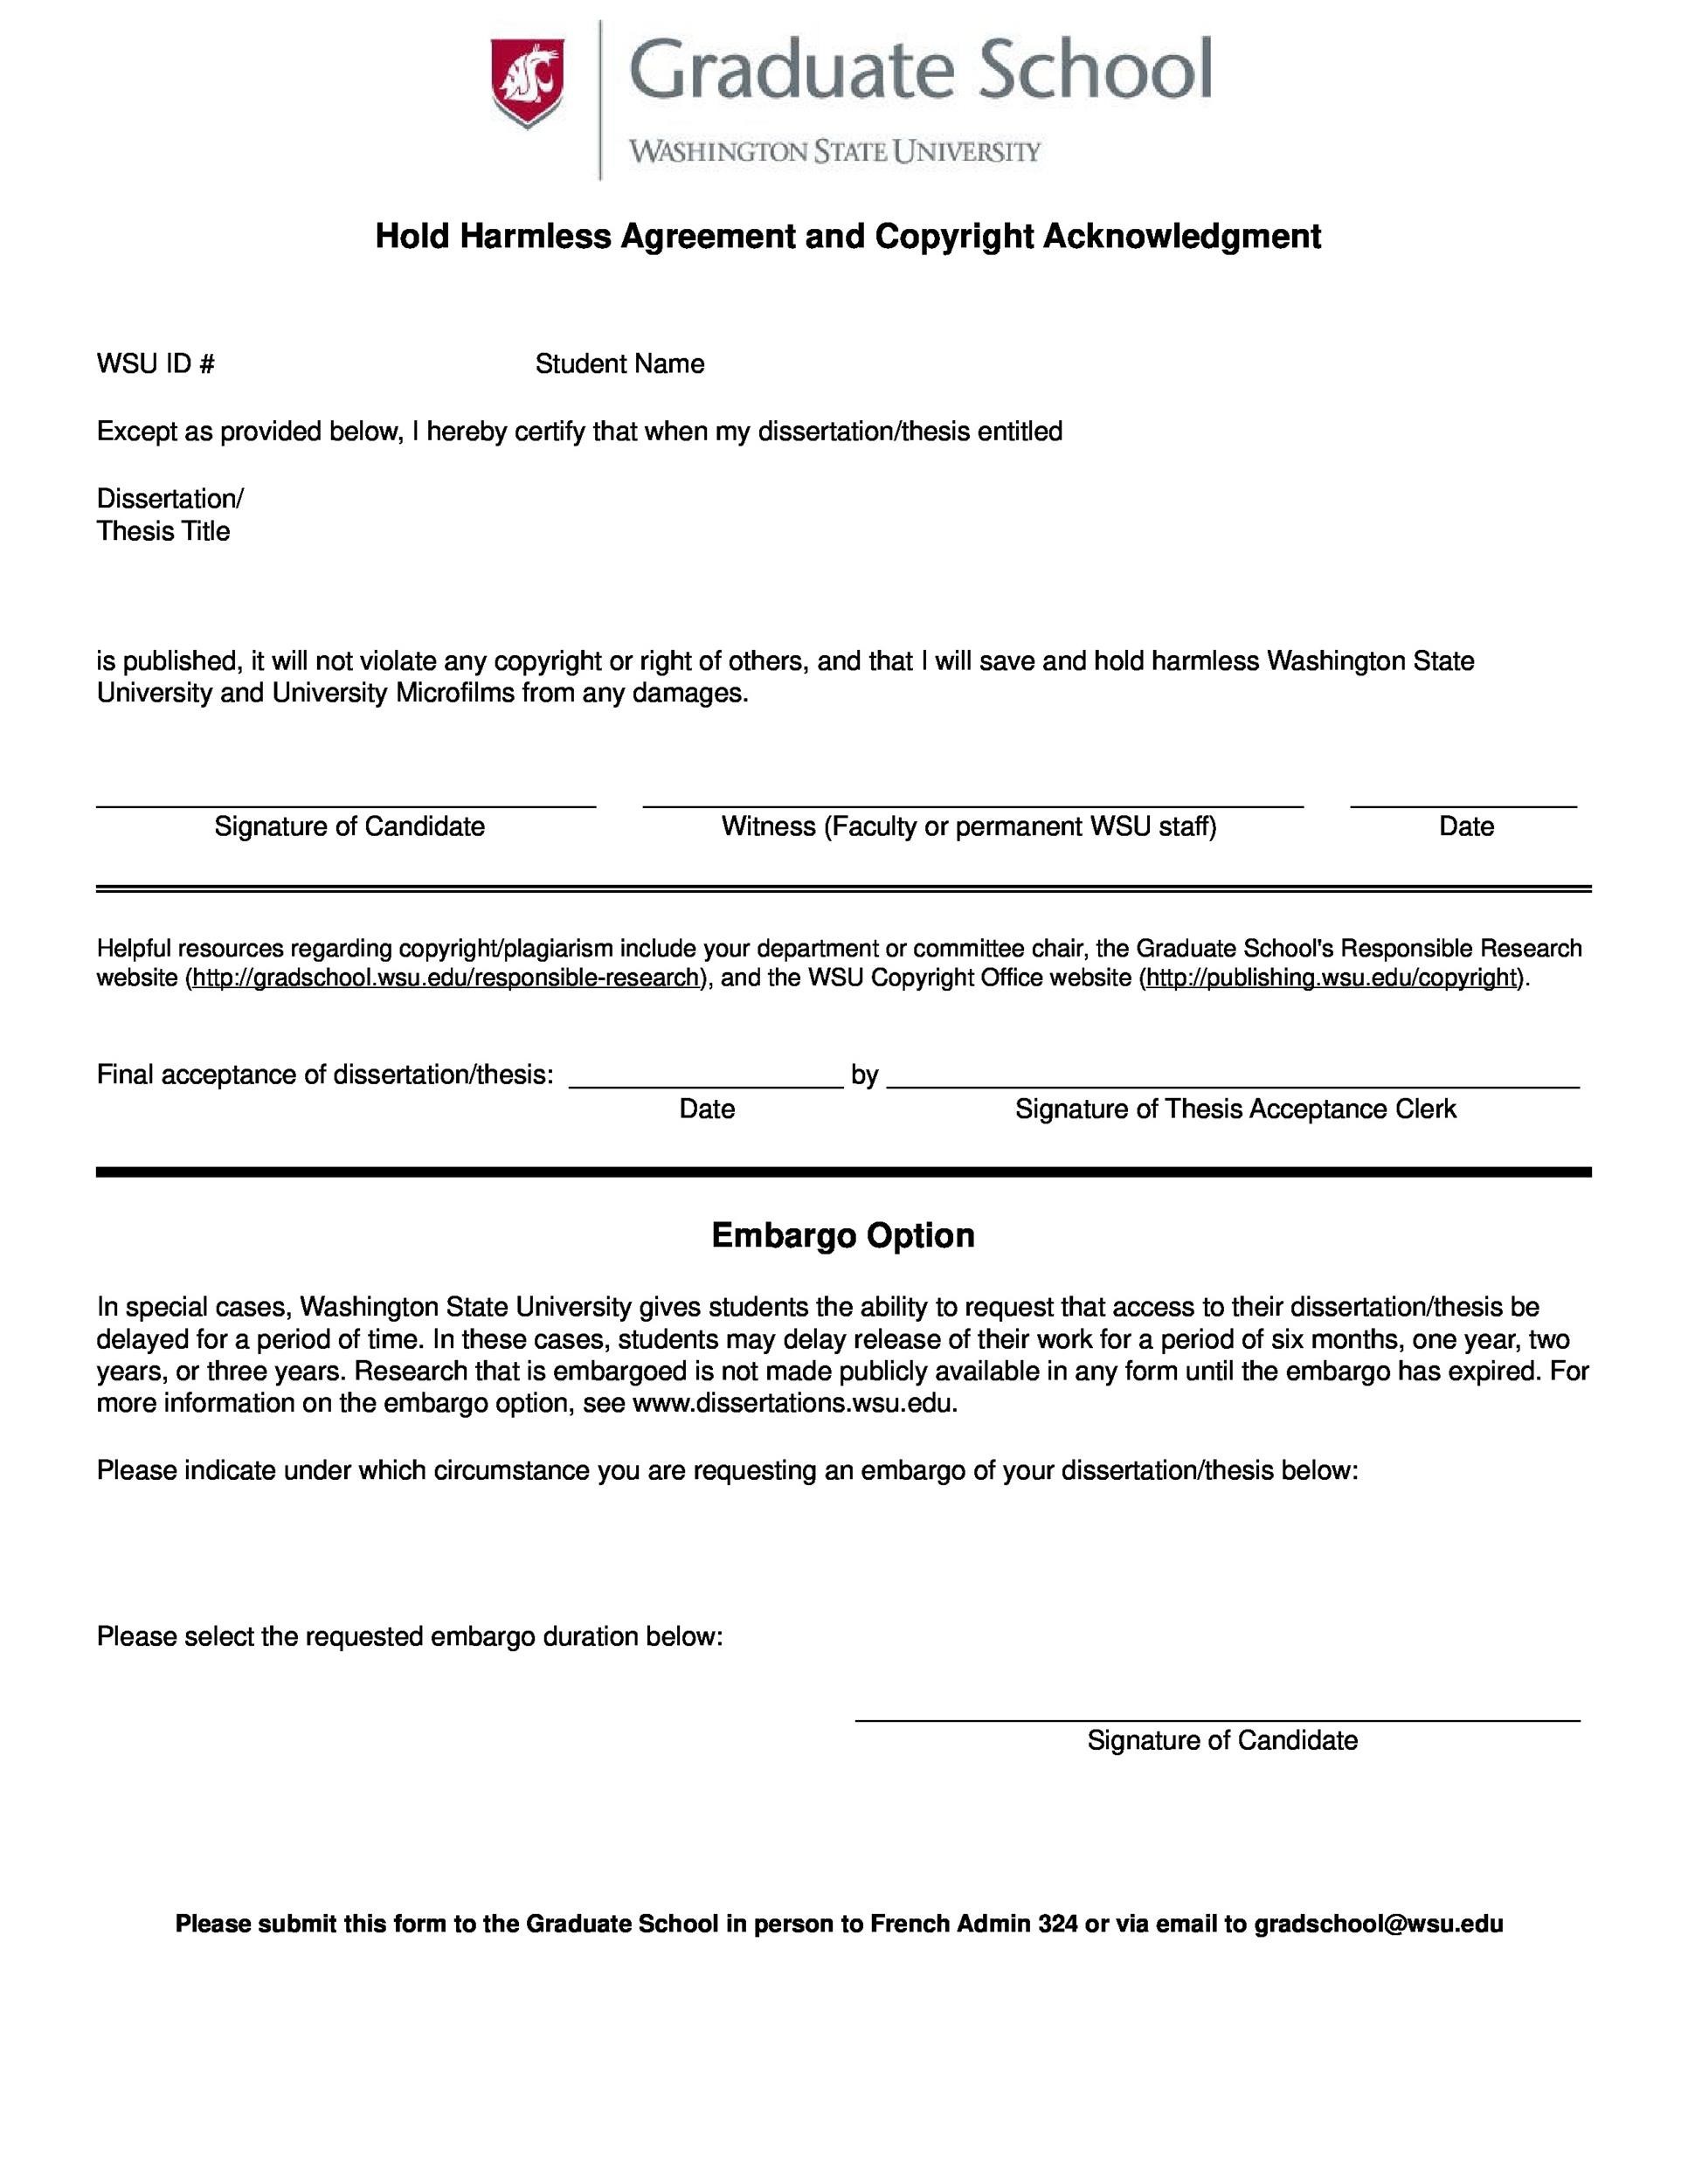 Free Hold Harmless Agreement Template 06